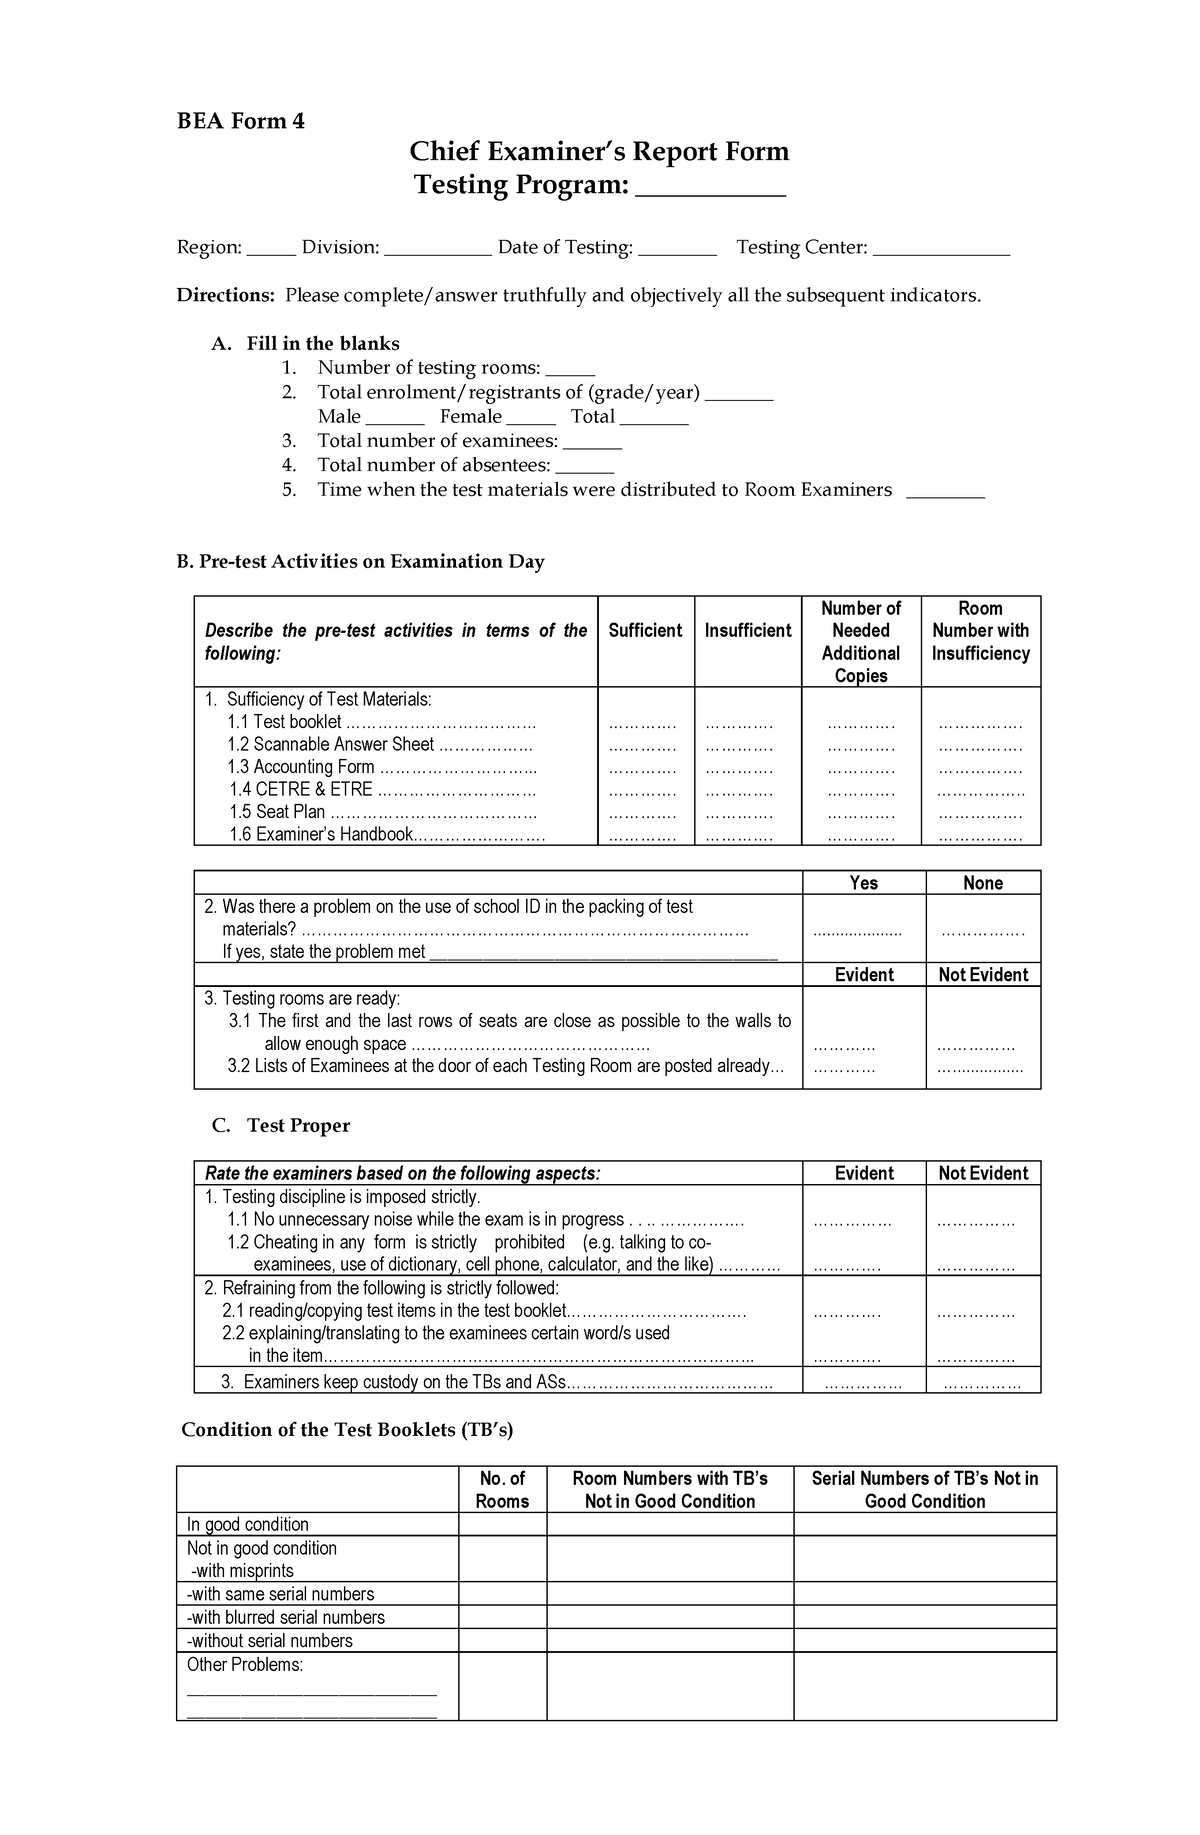 Form 4 - DFDFDFDFF - BEA Form 4 Chief Examiner’s Report Form Testing ...